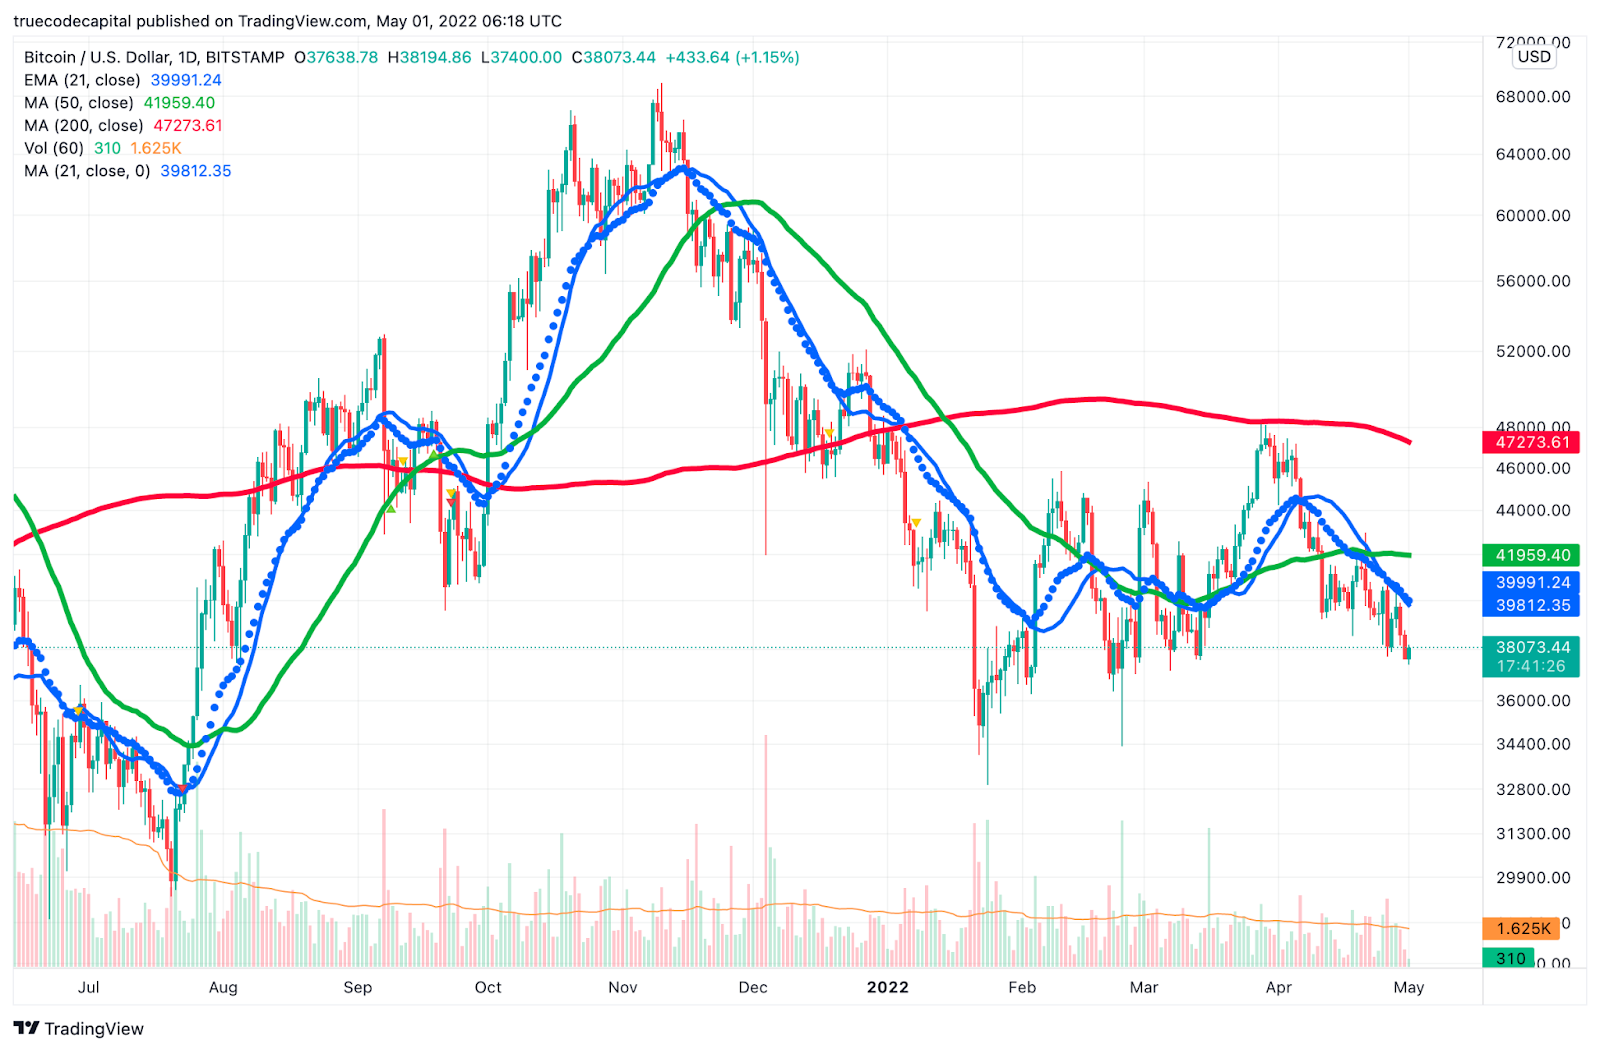 Figure 1: BTC Daily Chart June 2021 to Present - Data from TradingView